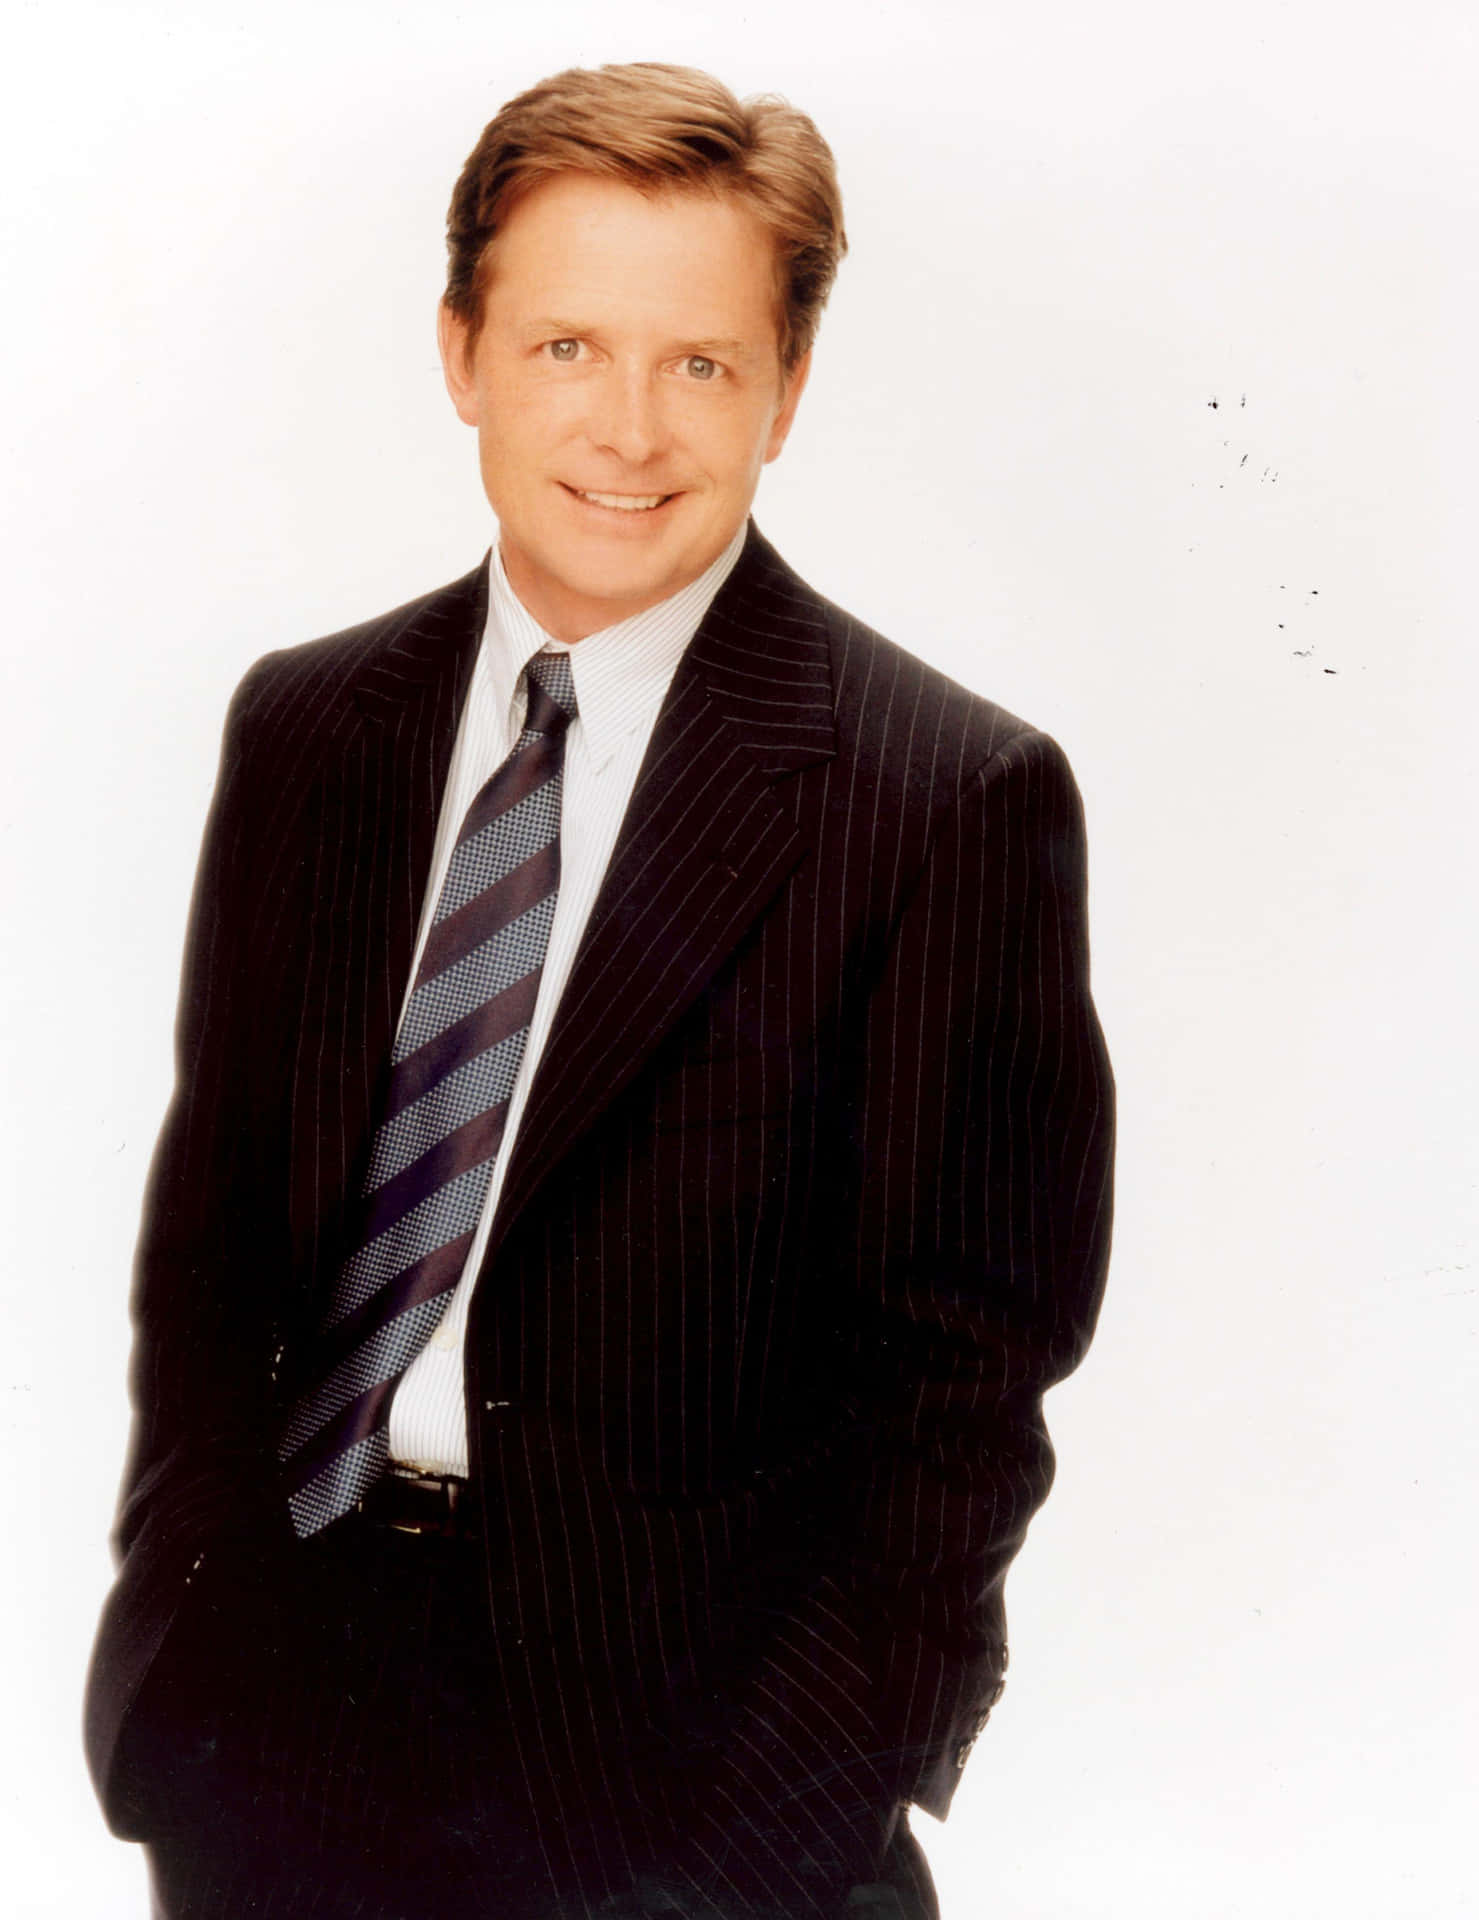 The Enigmatic Smile Of Michael J. Fox